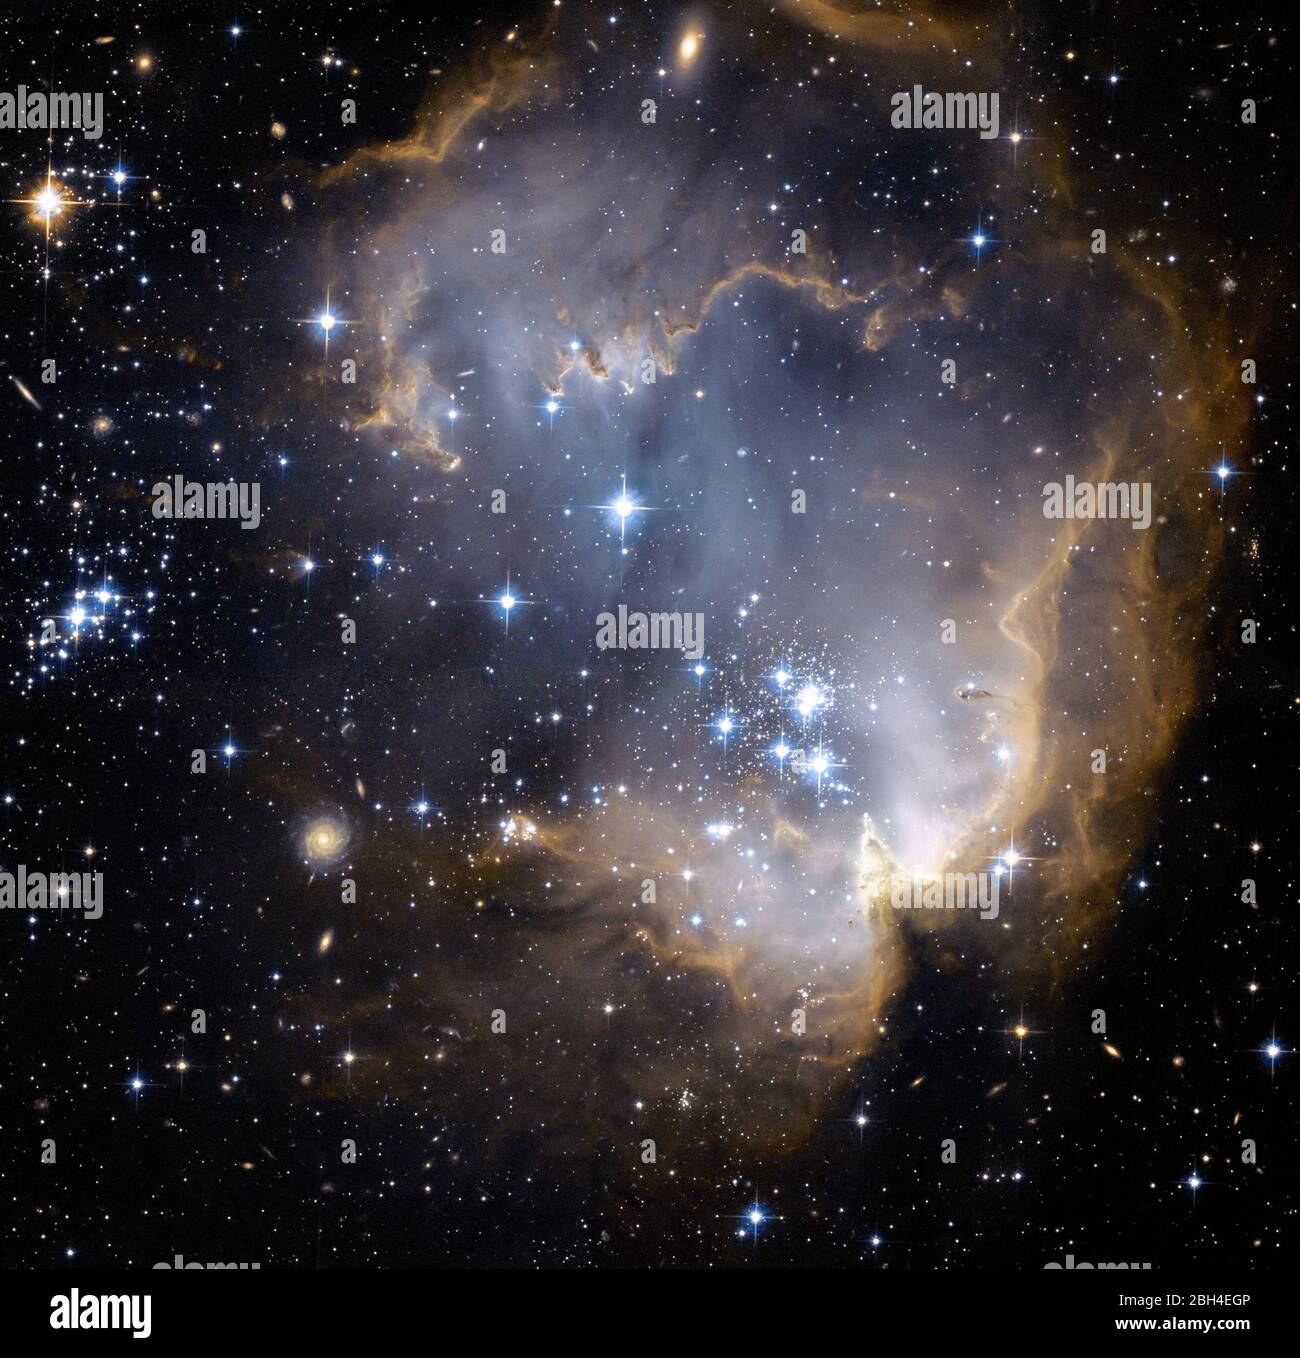 This image depicts bright blue newly formed stars that are blowing a cavity in the center of a fascinating star-forming region known as N90. The high energy radiation blazing out from the hot young stars in N90 is eroding the outer portions of the nebula from the inside, as the diffuse outer reaches of the nebula prevent the energetic outflows from streaming away from the cluster directly.  Stock Photo